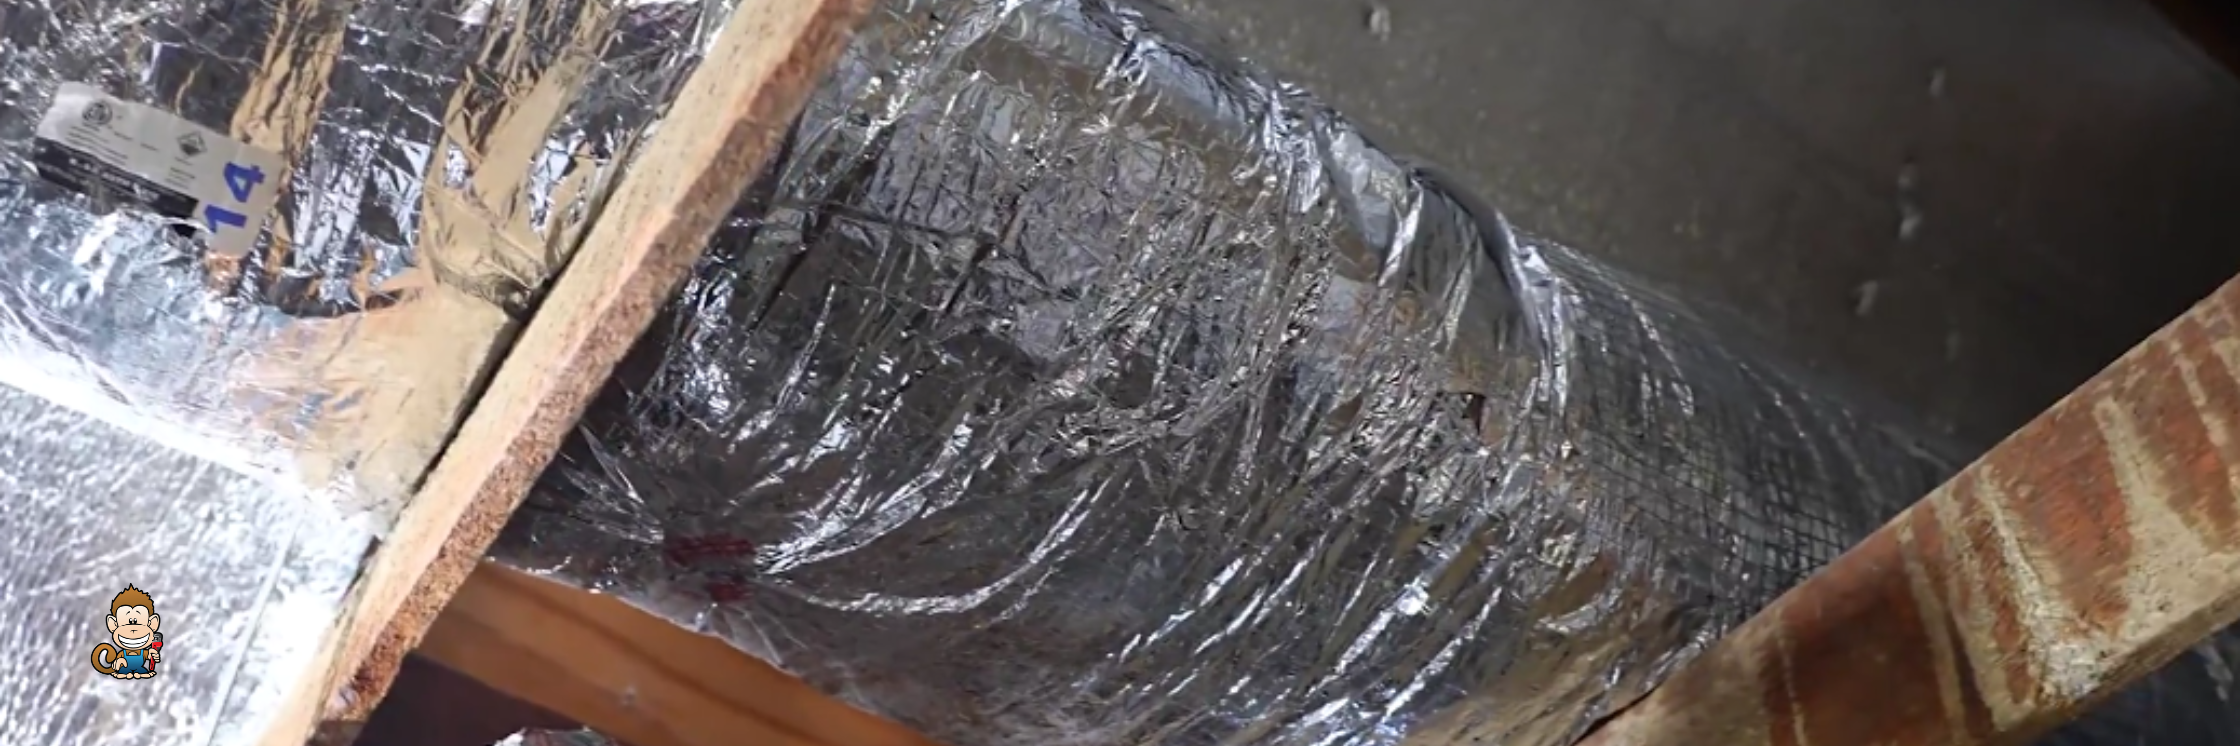 Can I Use My Existing Ductwork for a New HVAC Installation? (Video)